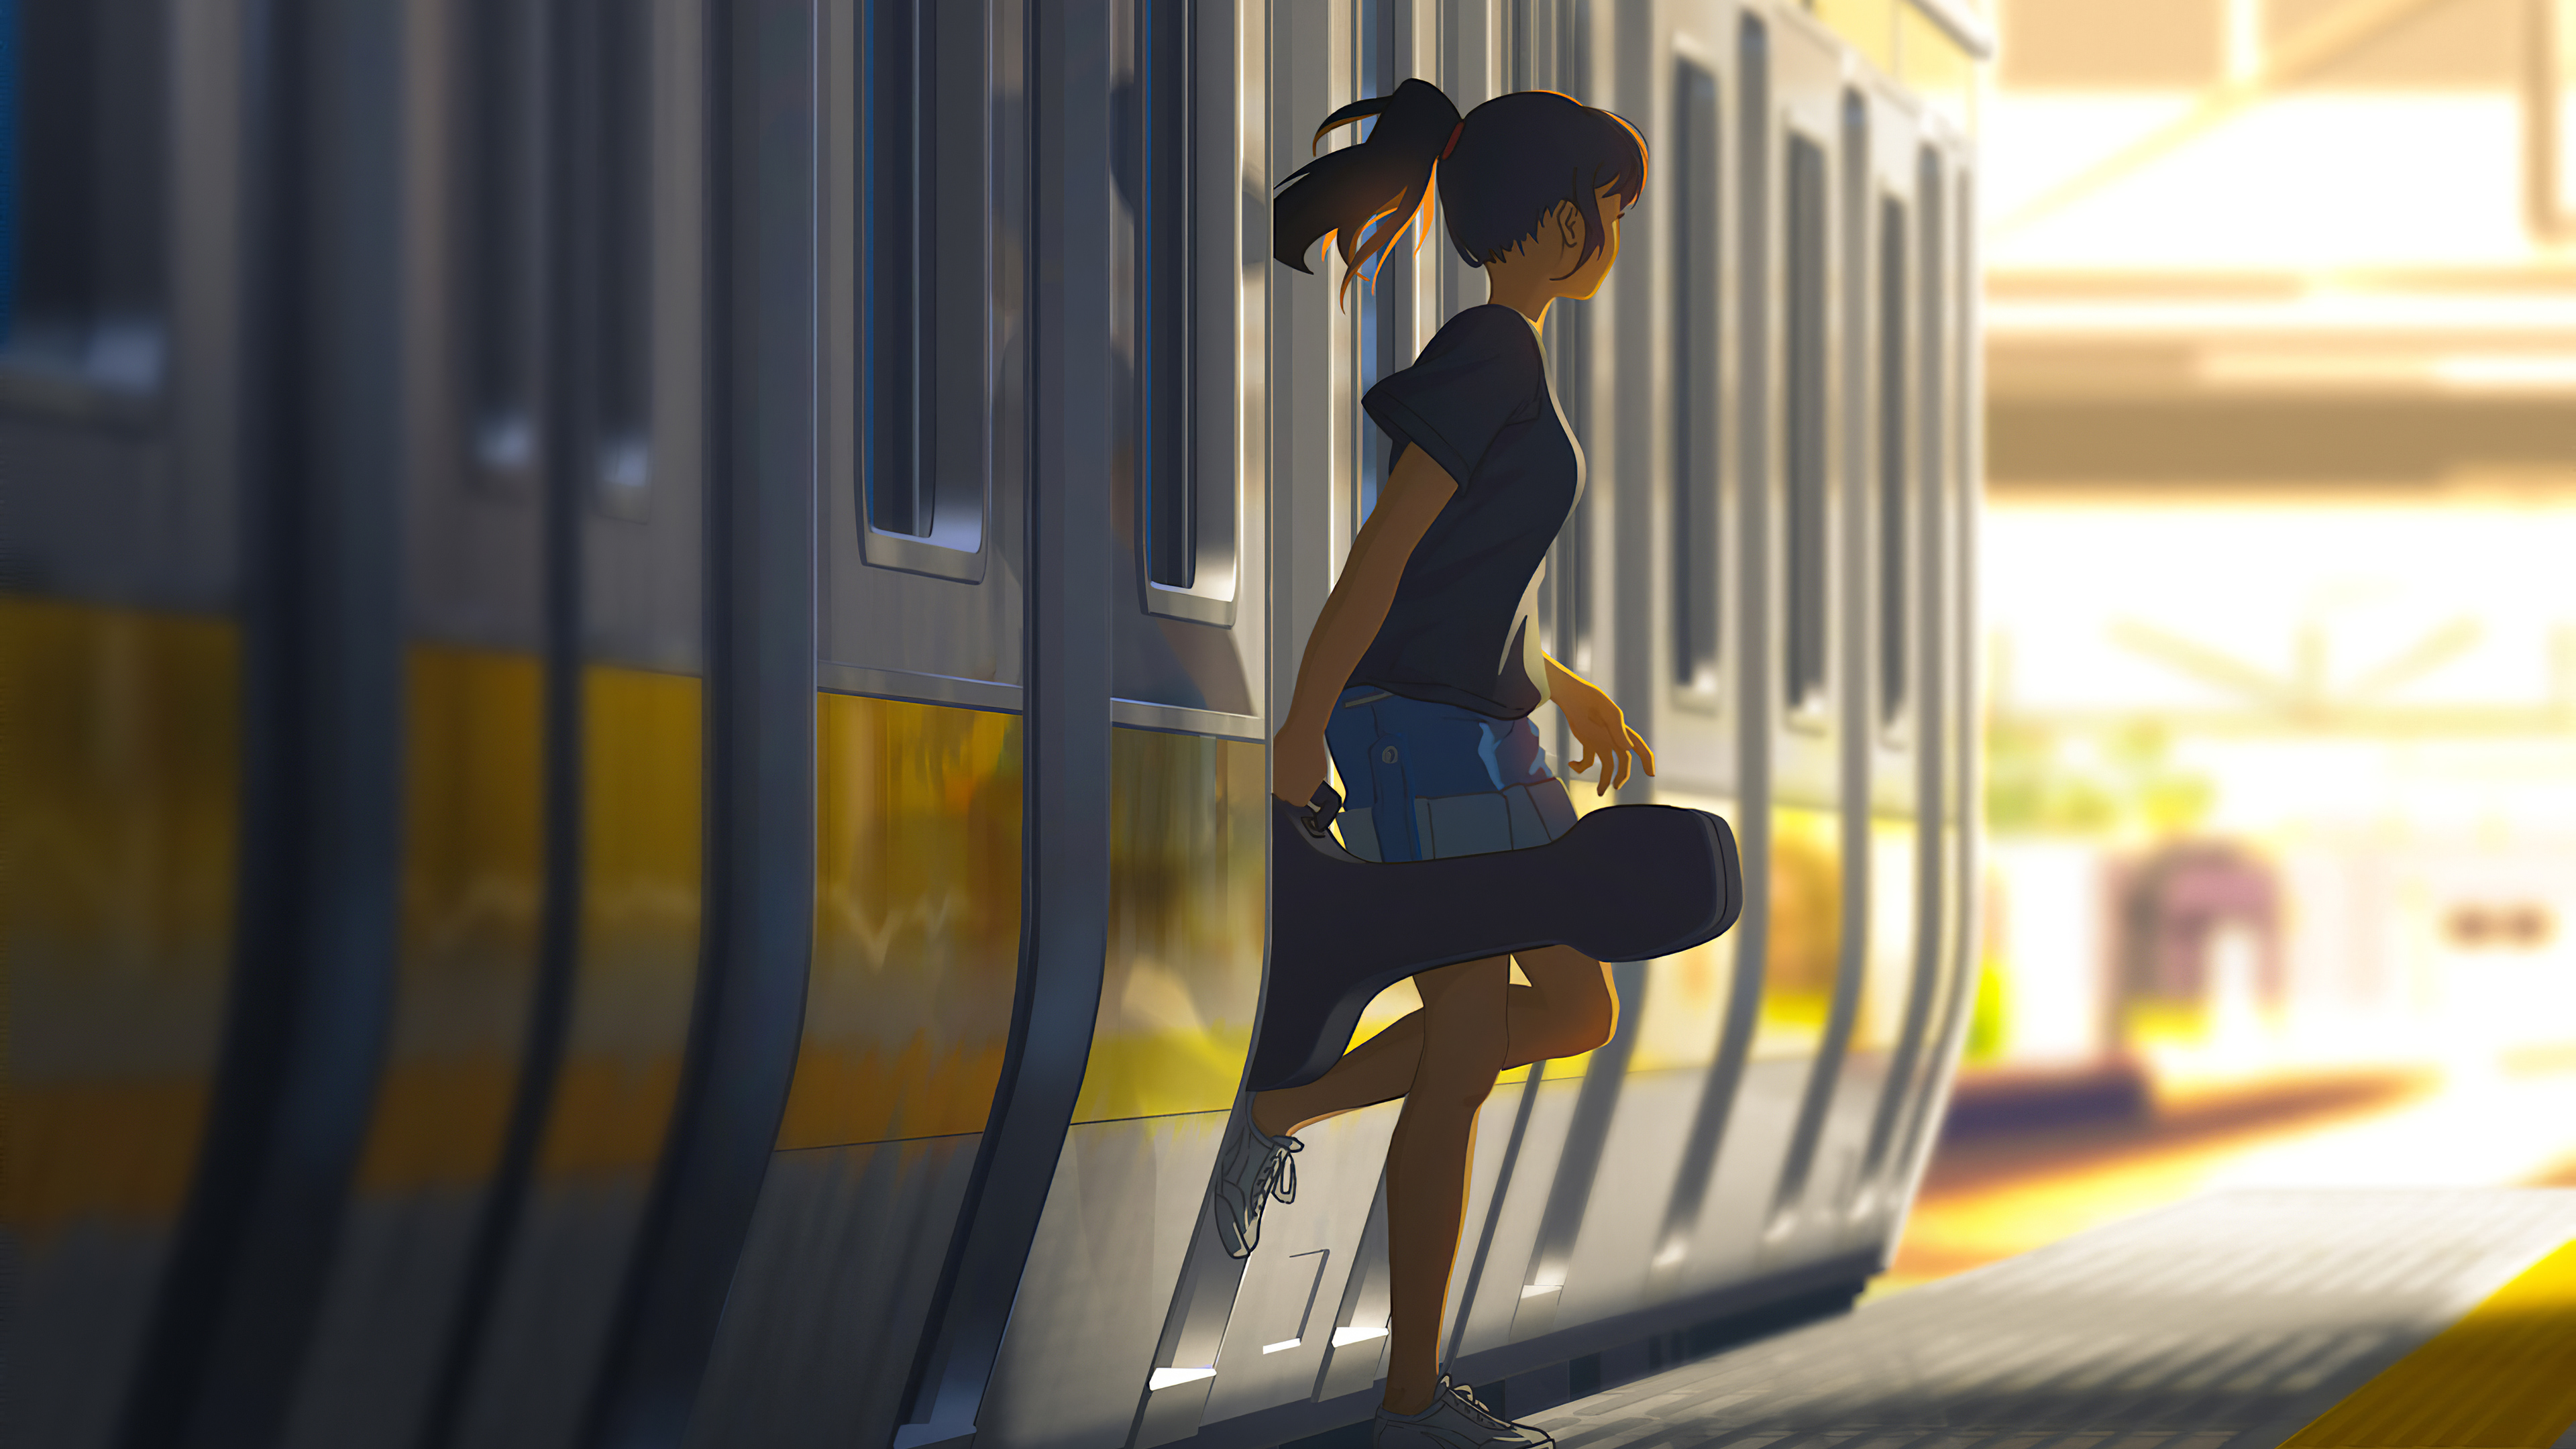 A Girl Exiting A Train With A Guitar by bysau_